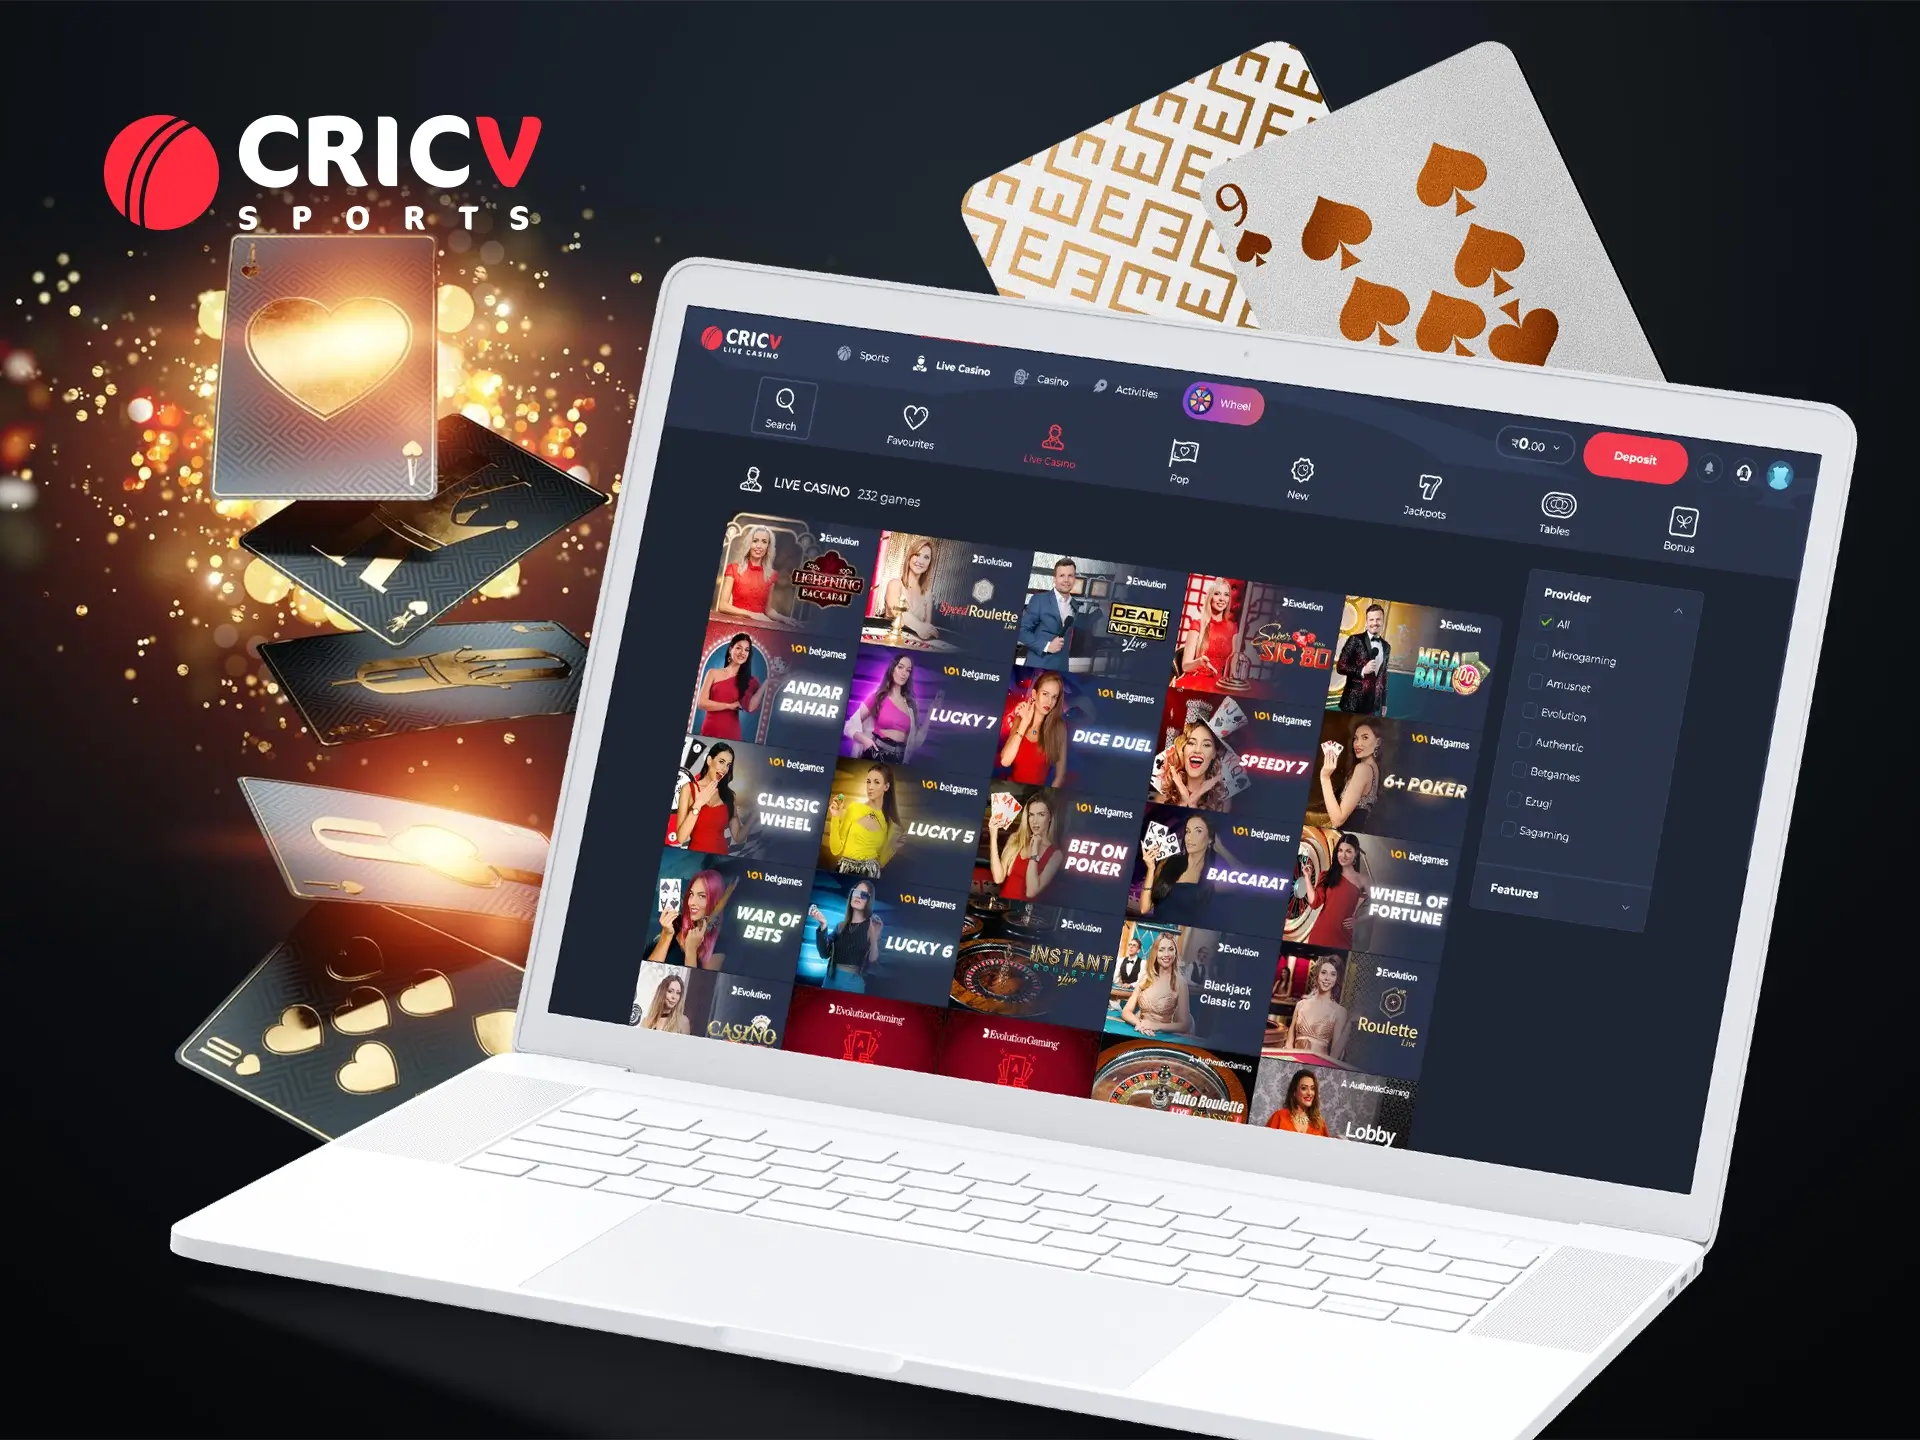 Live casino is represented at Cricv by a large list of games to suit all tastes and experiences.